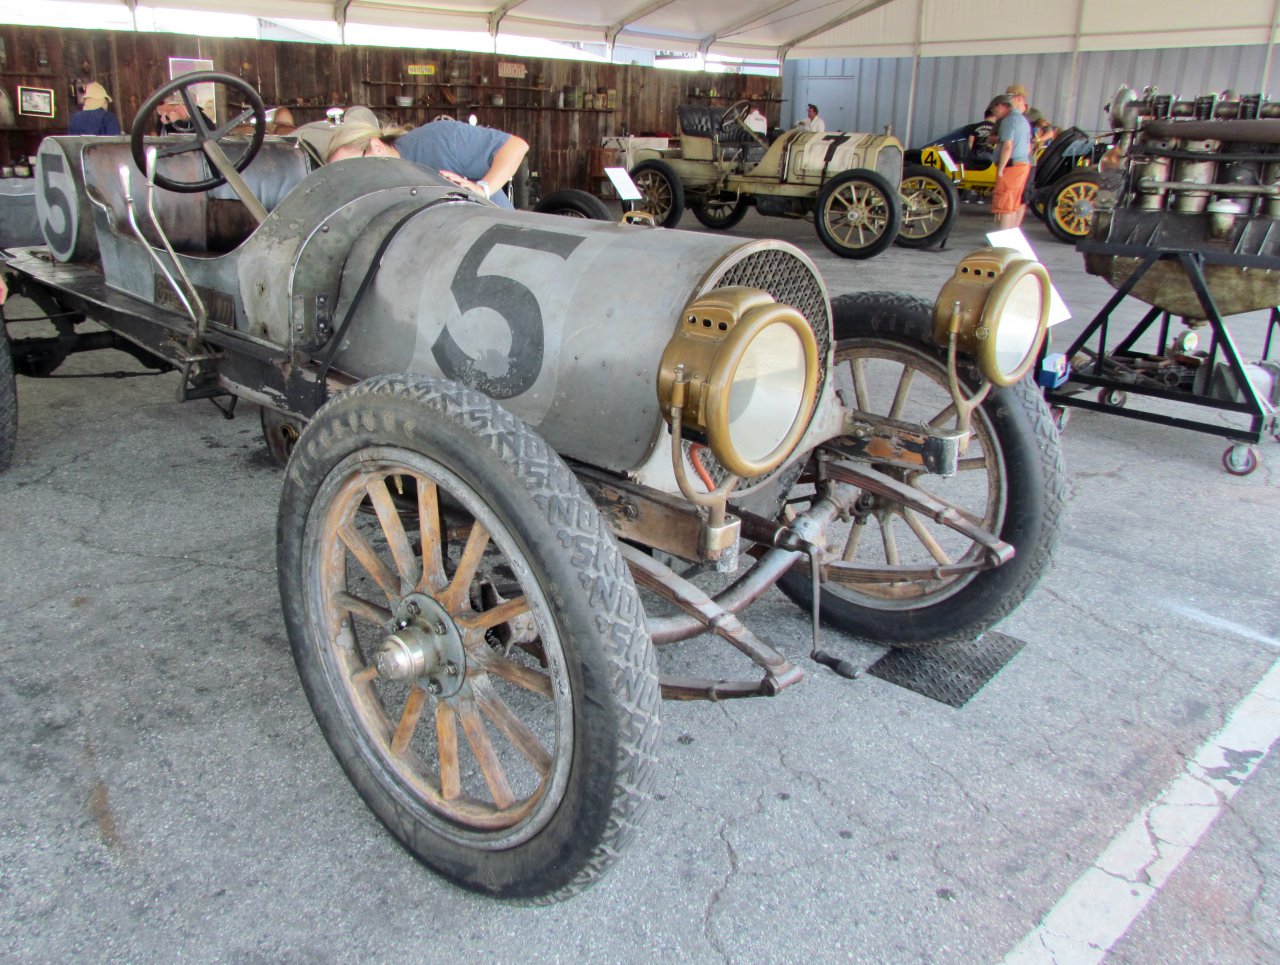 ragtime, Inherited trunk leads to fascination with early history of auto racing, ClassicCars.com Journal